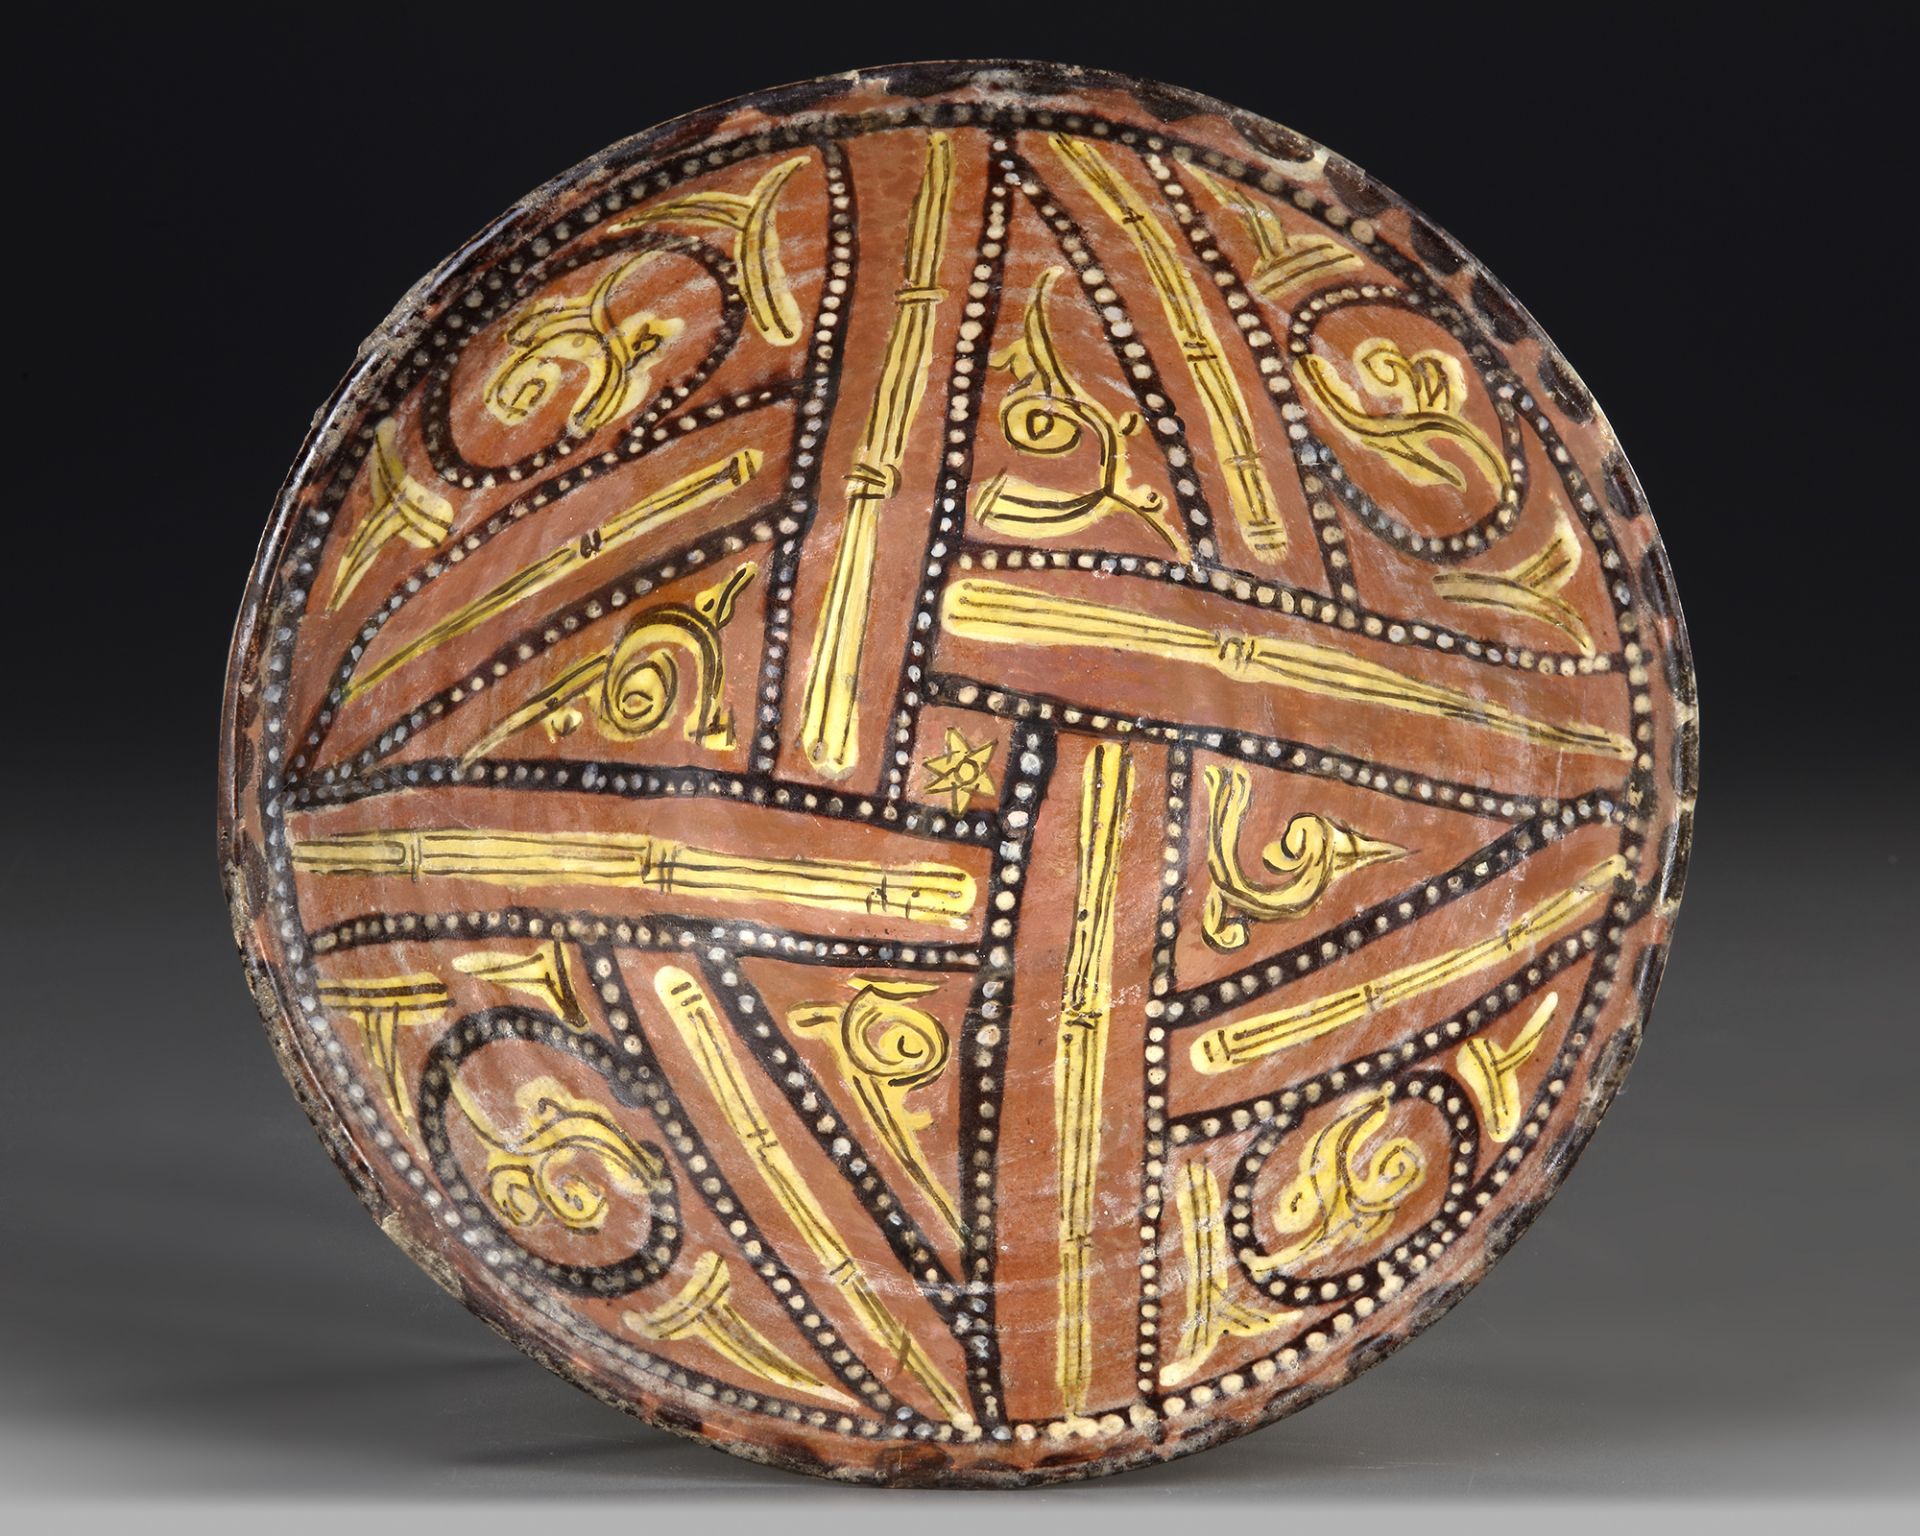 A NISHAPUR CONICAL POTTERY BOWL, PERSIA, 10TH CENTURY - Image 8 of 10